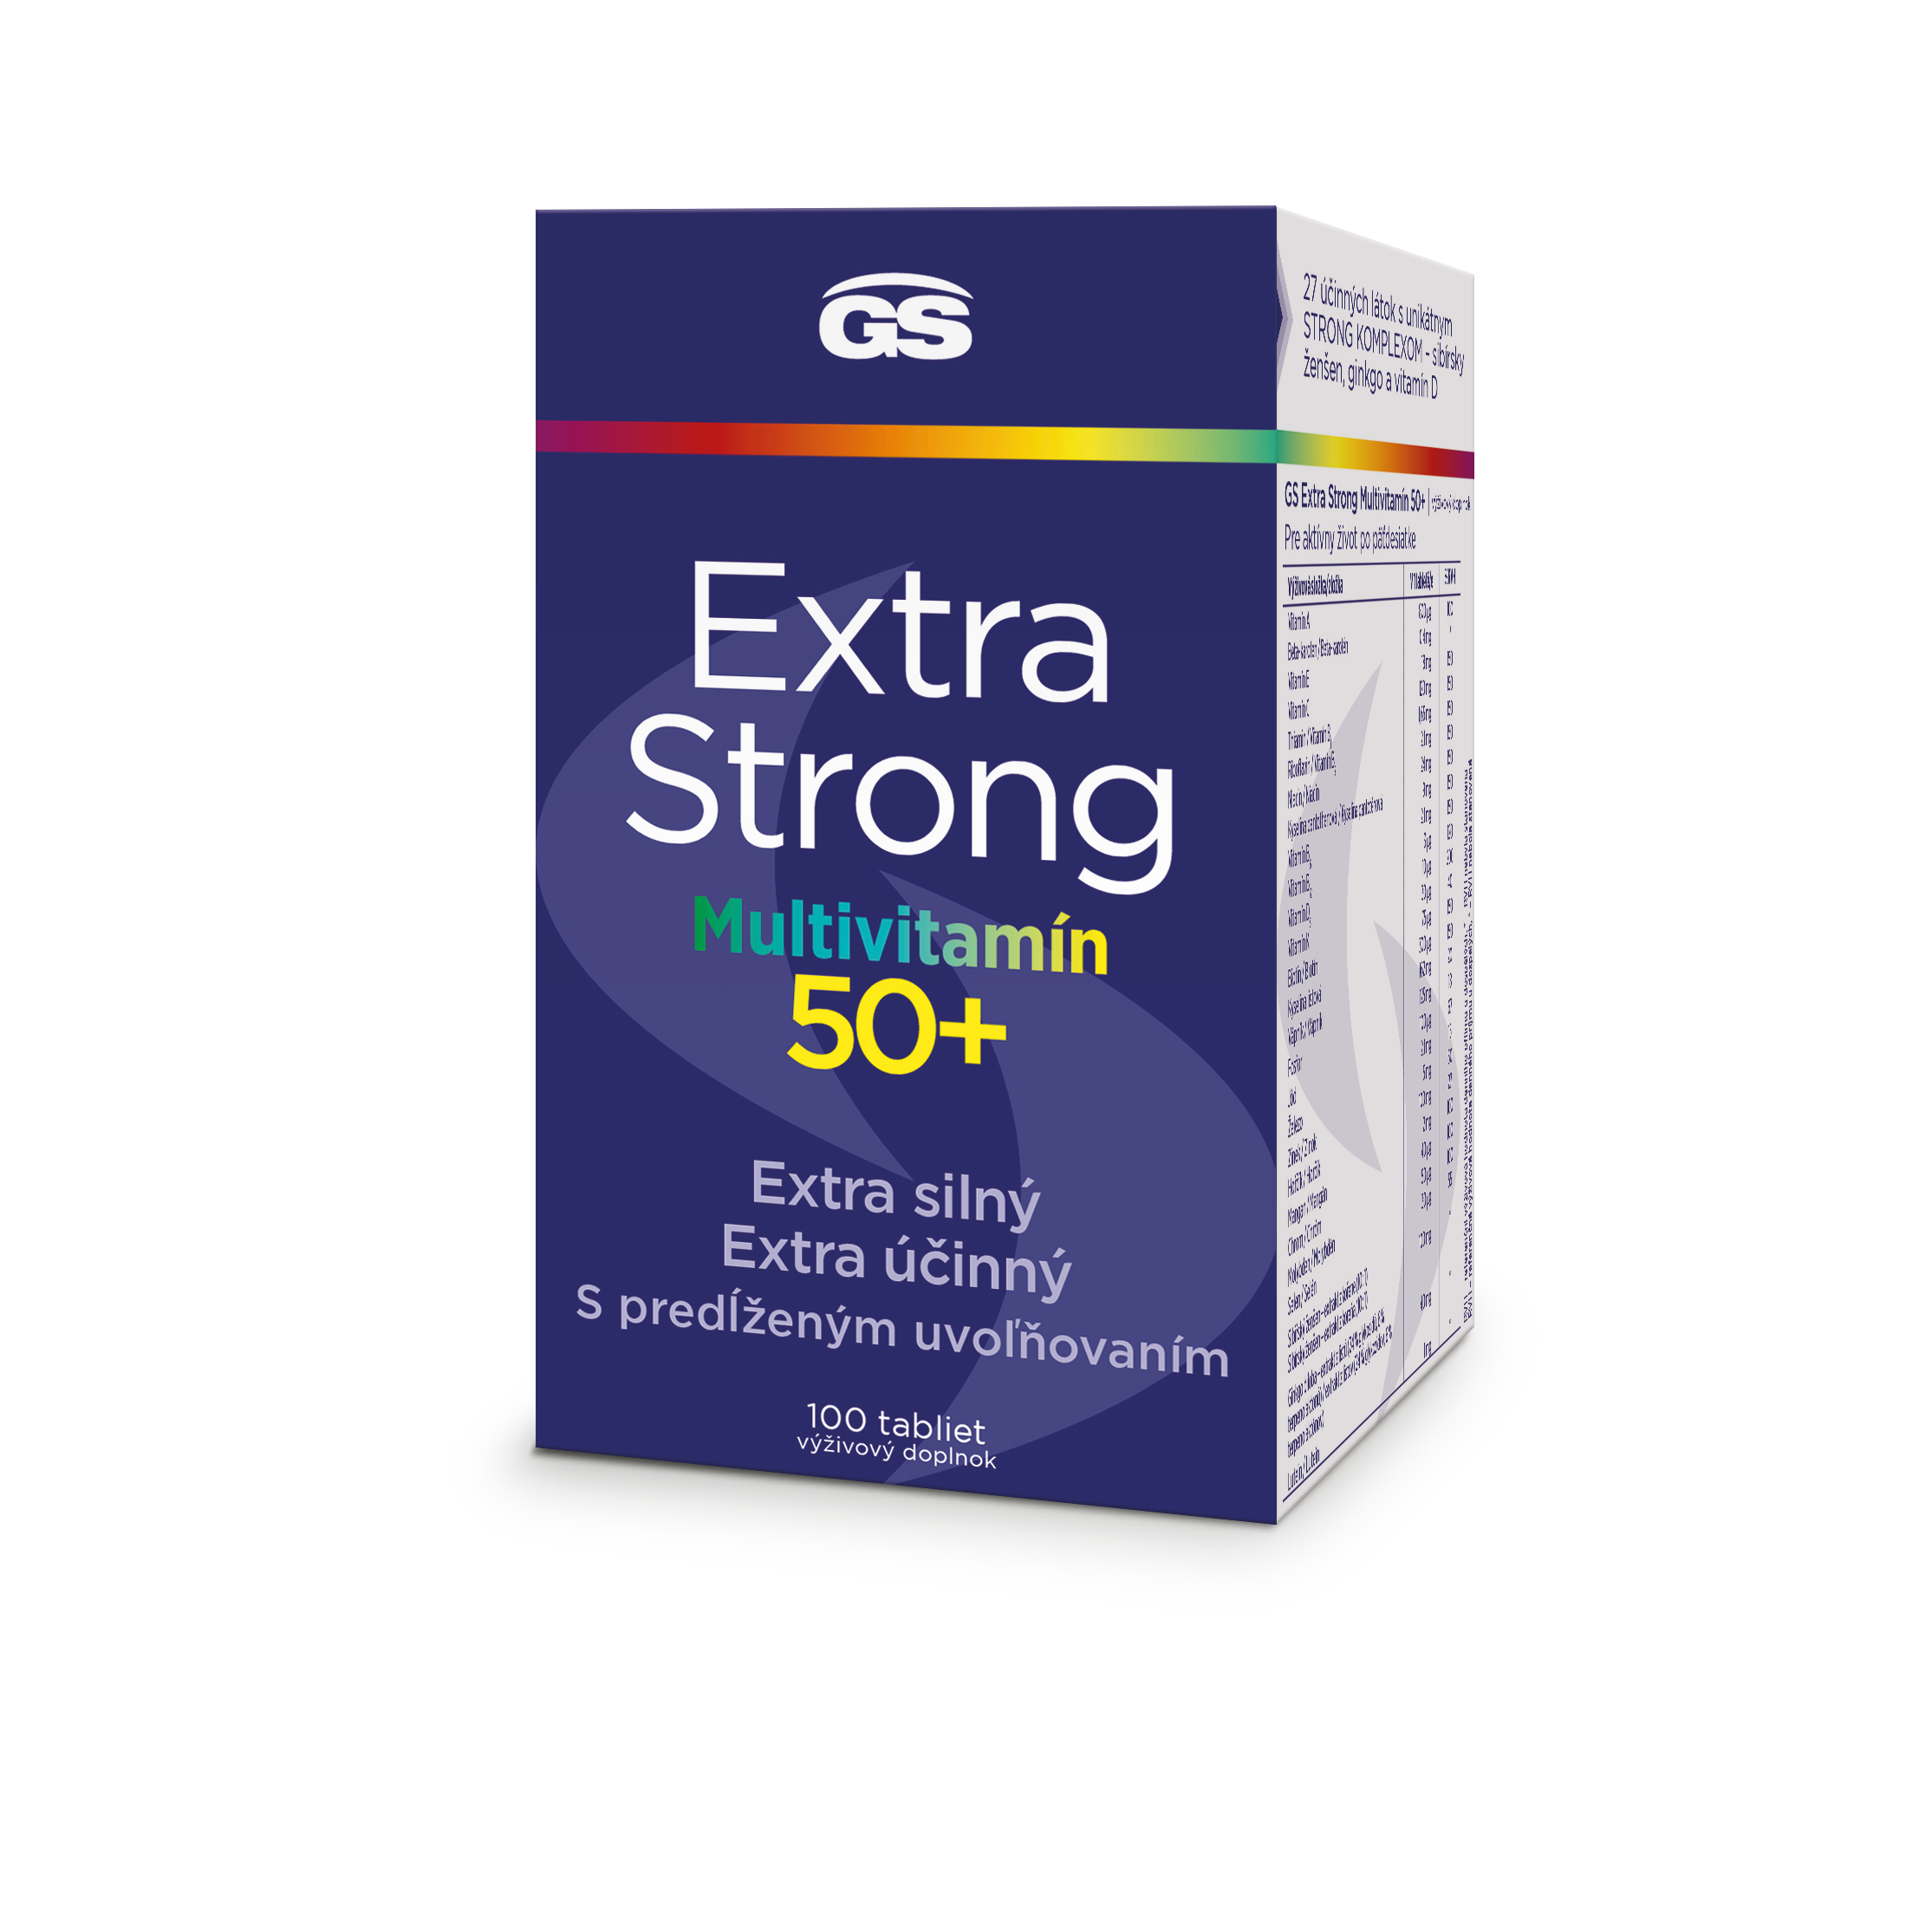 GS Extra Strong Multivitamin 50, 100 tbl